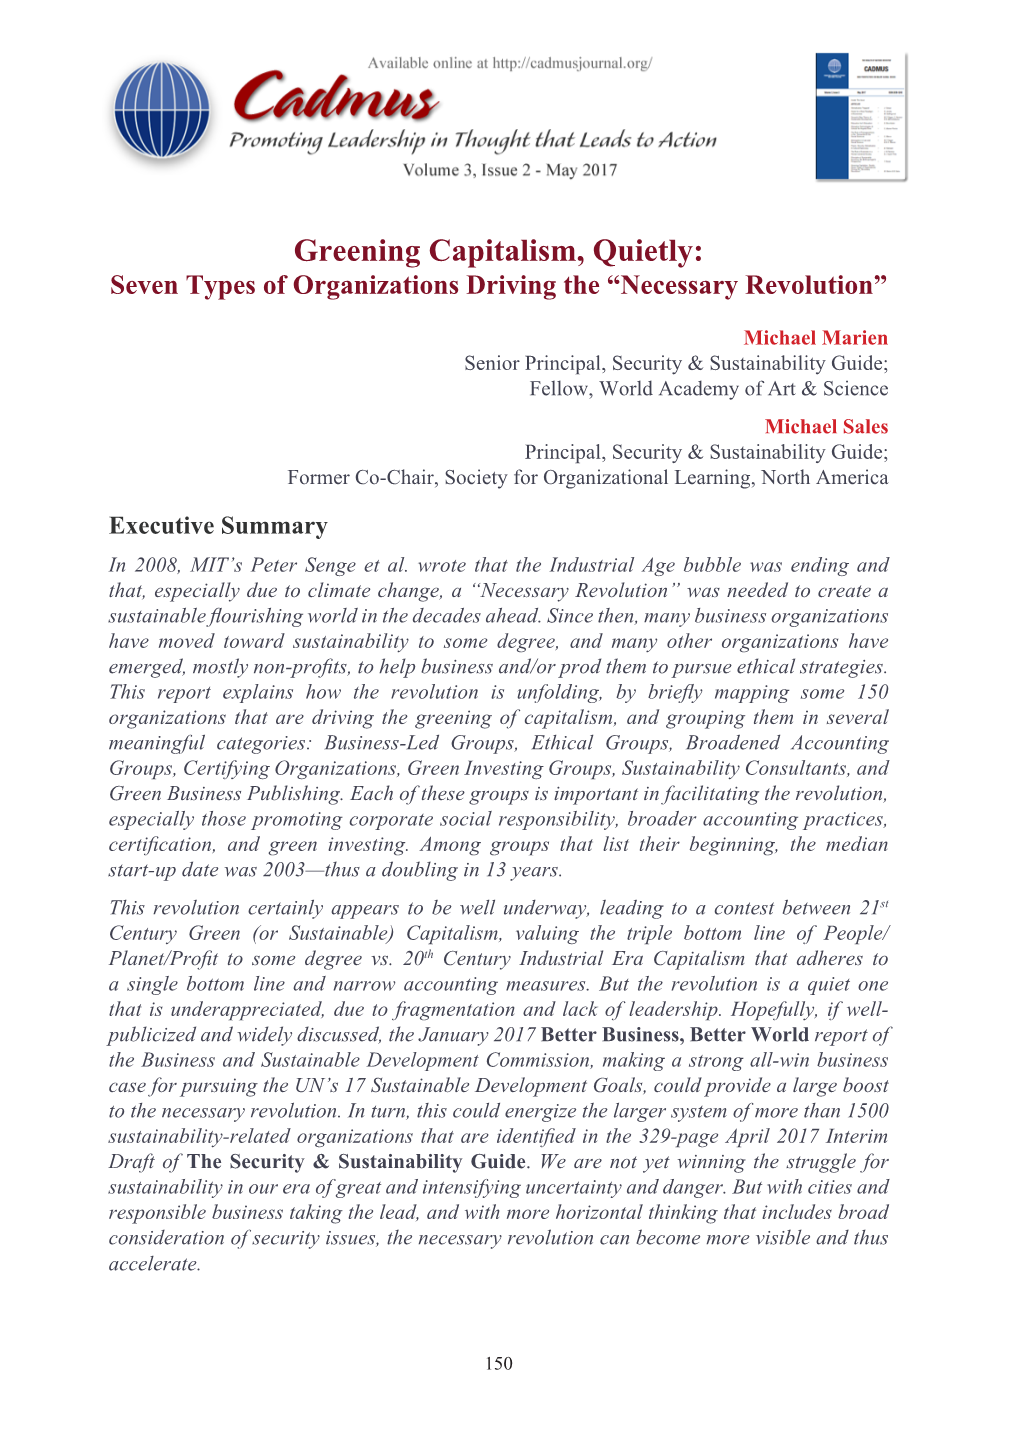 Greening Capitalism, Quietly: Seven Types of Organizations Driving the “Necessary Revolution”